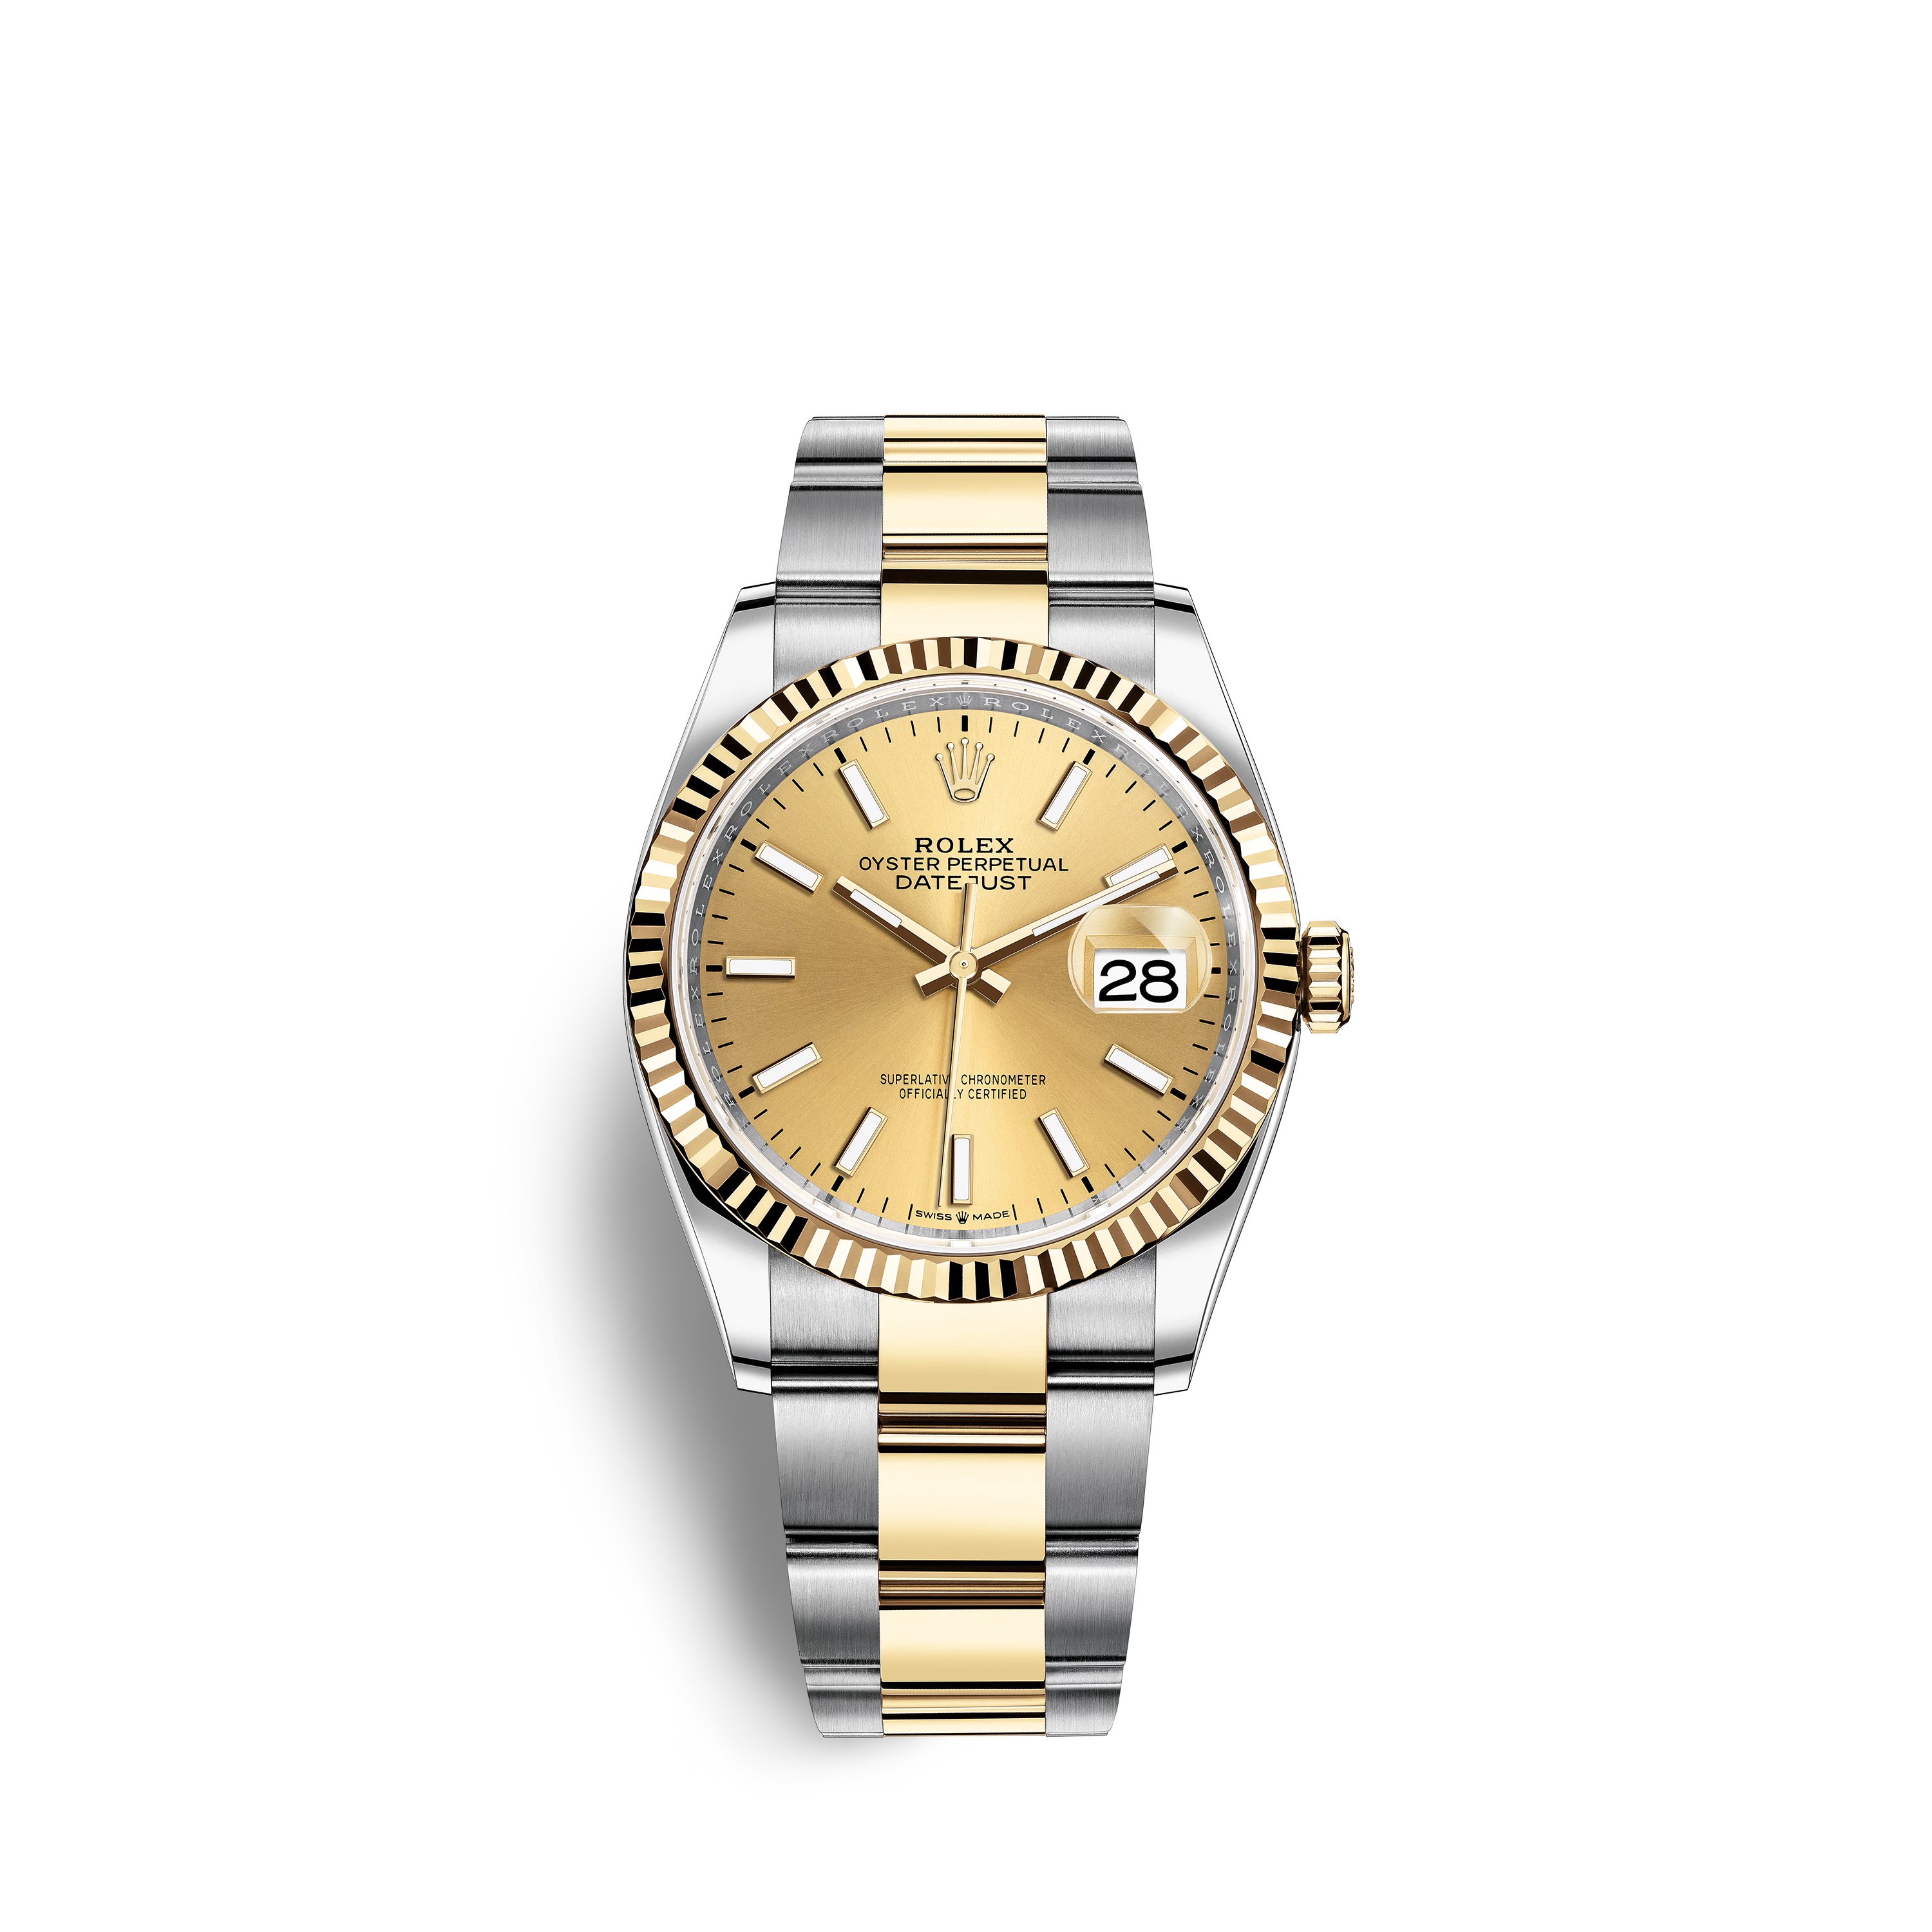 Datejust 36 126233 Gold & Stainless Steel Watch (Champagne)